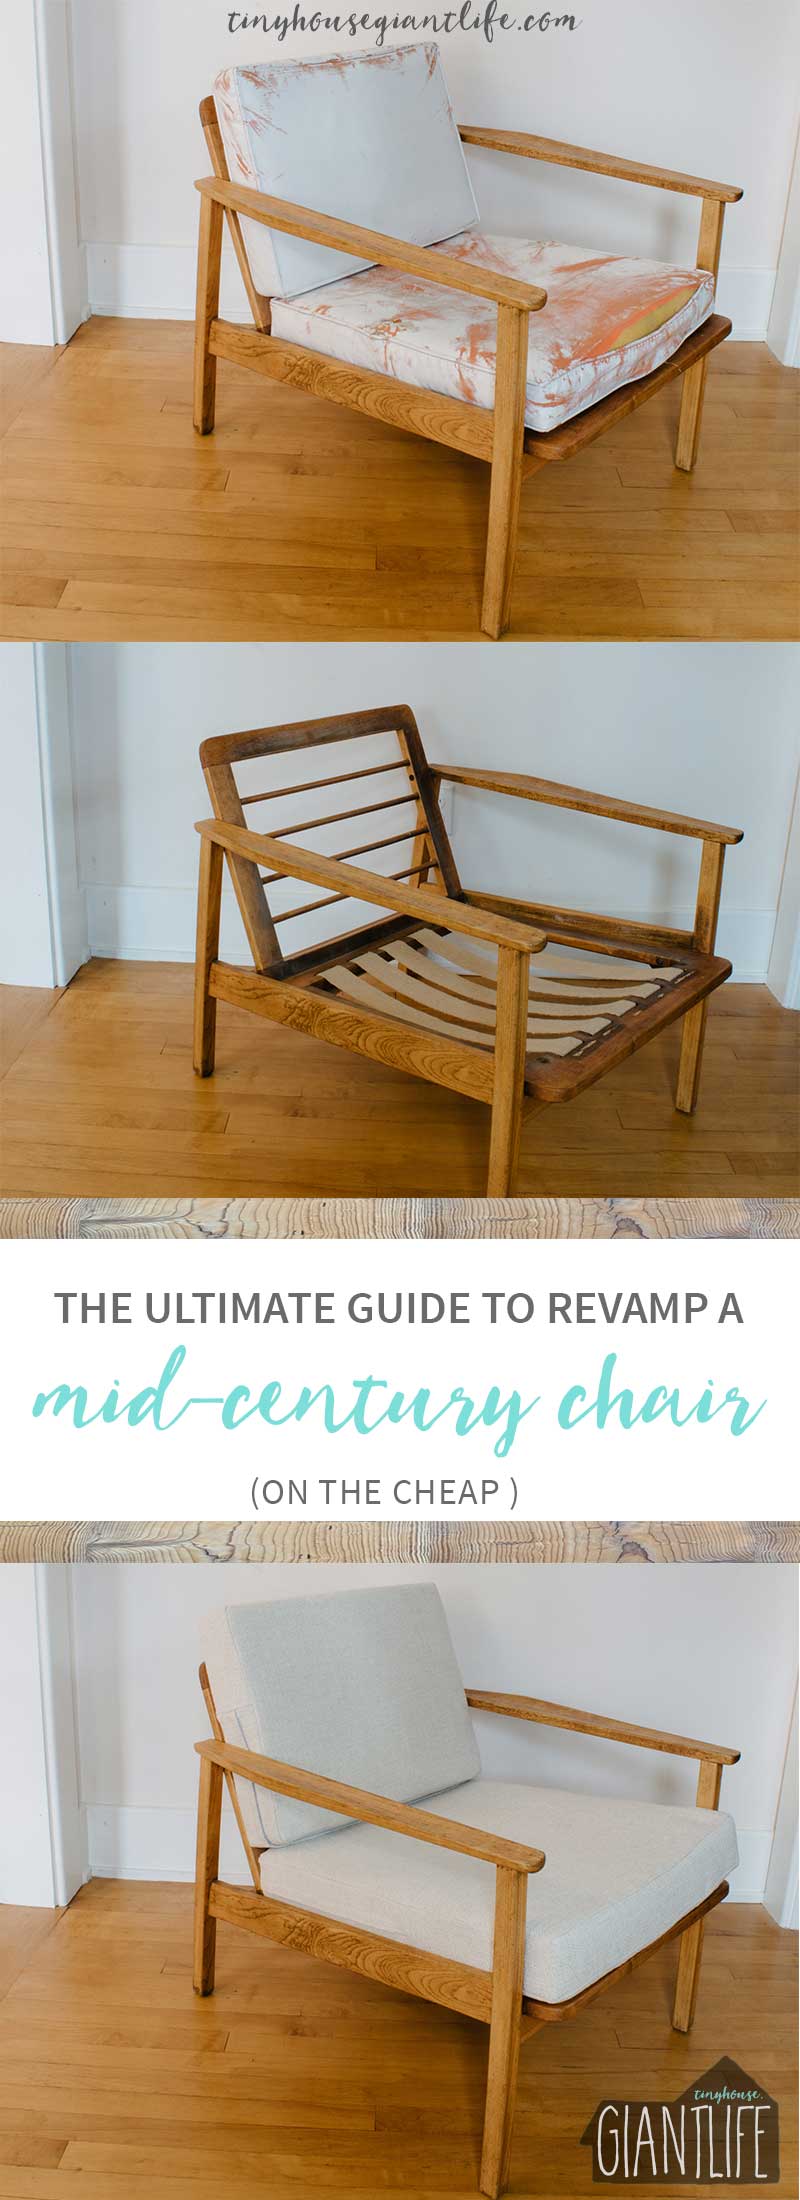 The Ultimate Guide To Revamp A Mid-Century Chair (On The Cheap)